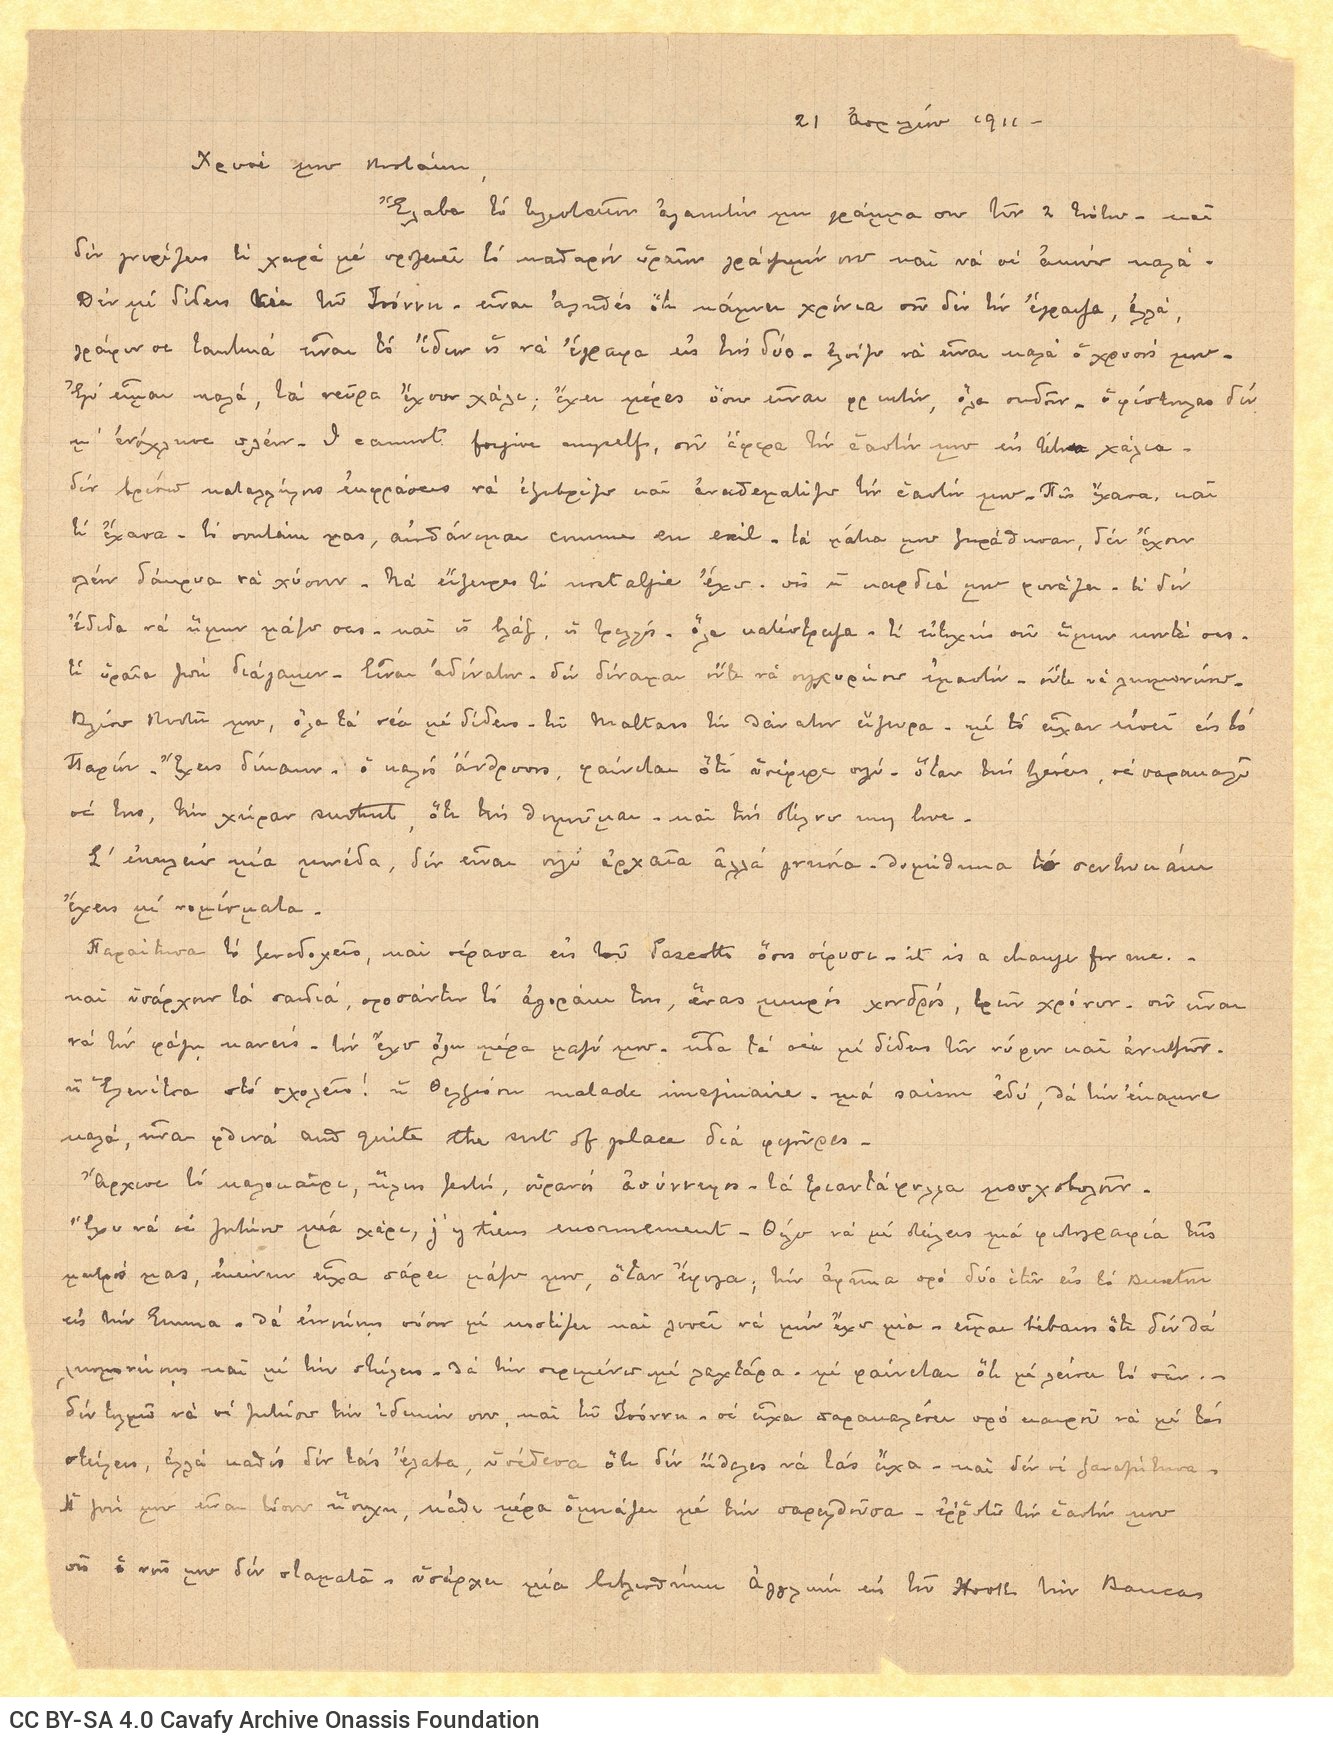 Handwritten letter by Paul Cavafy to C. P. Cavafy from France, according to the content and the sequence of his previous and 